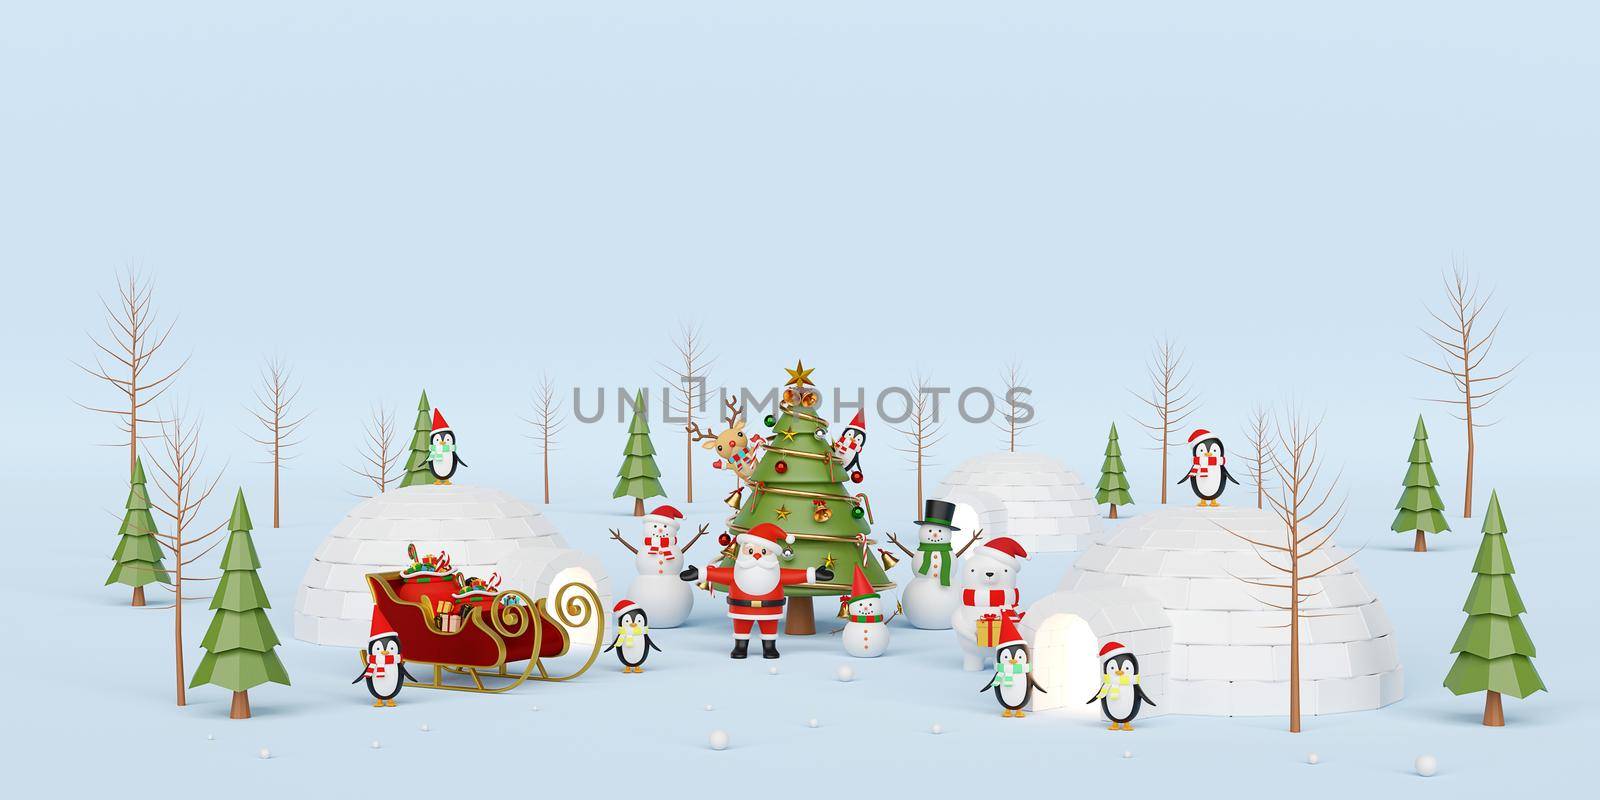 Merry Christmas and Happy New Year, Christmas celebration with Santa Claus and friend, 3d rendering by nutzchotwarut